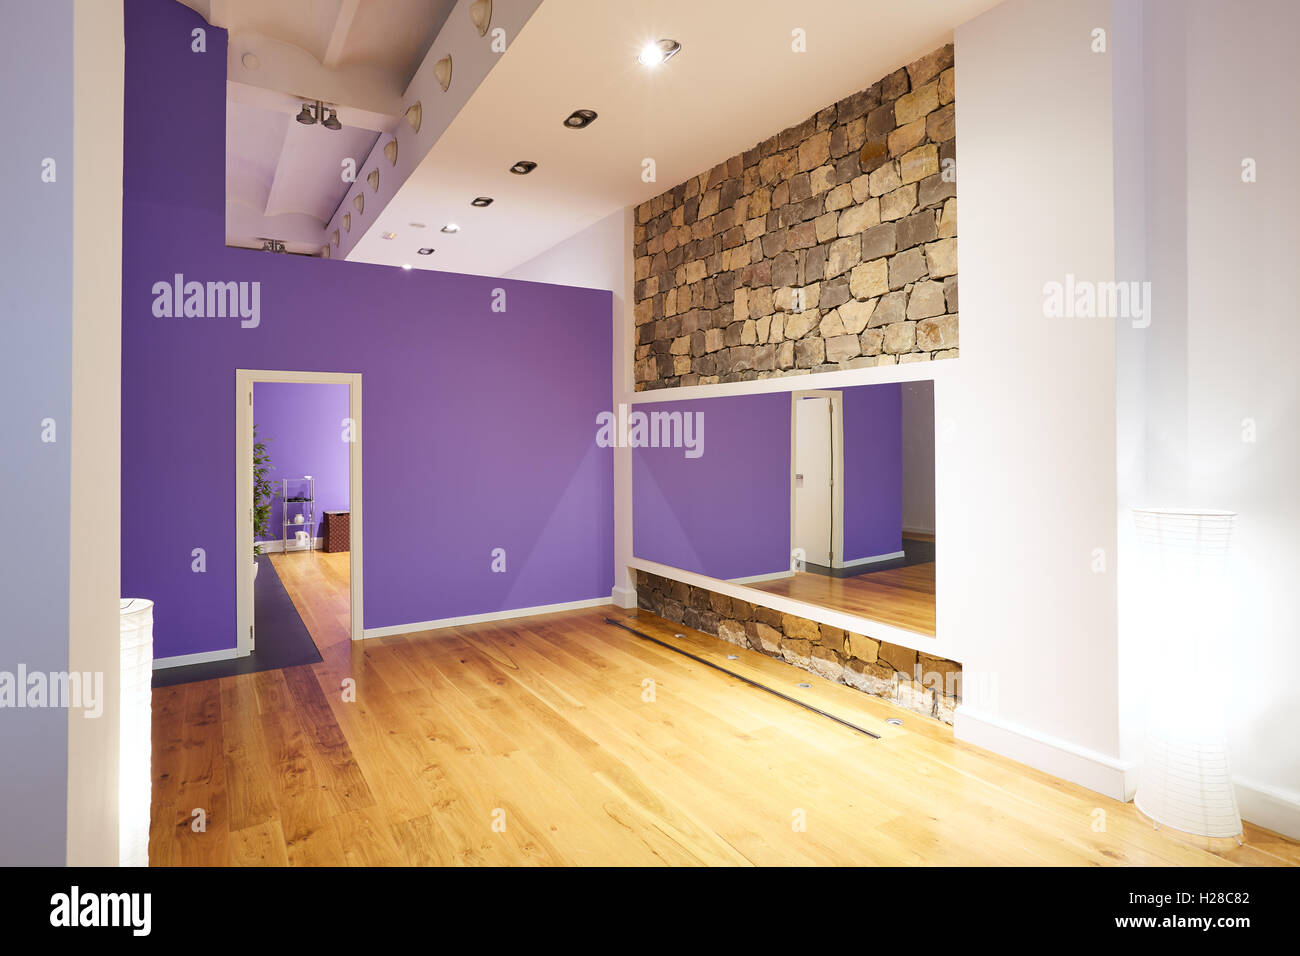 Gym indoor with wooden floor mirror and stone wall Stock Photo